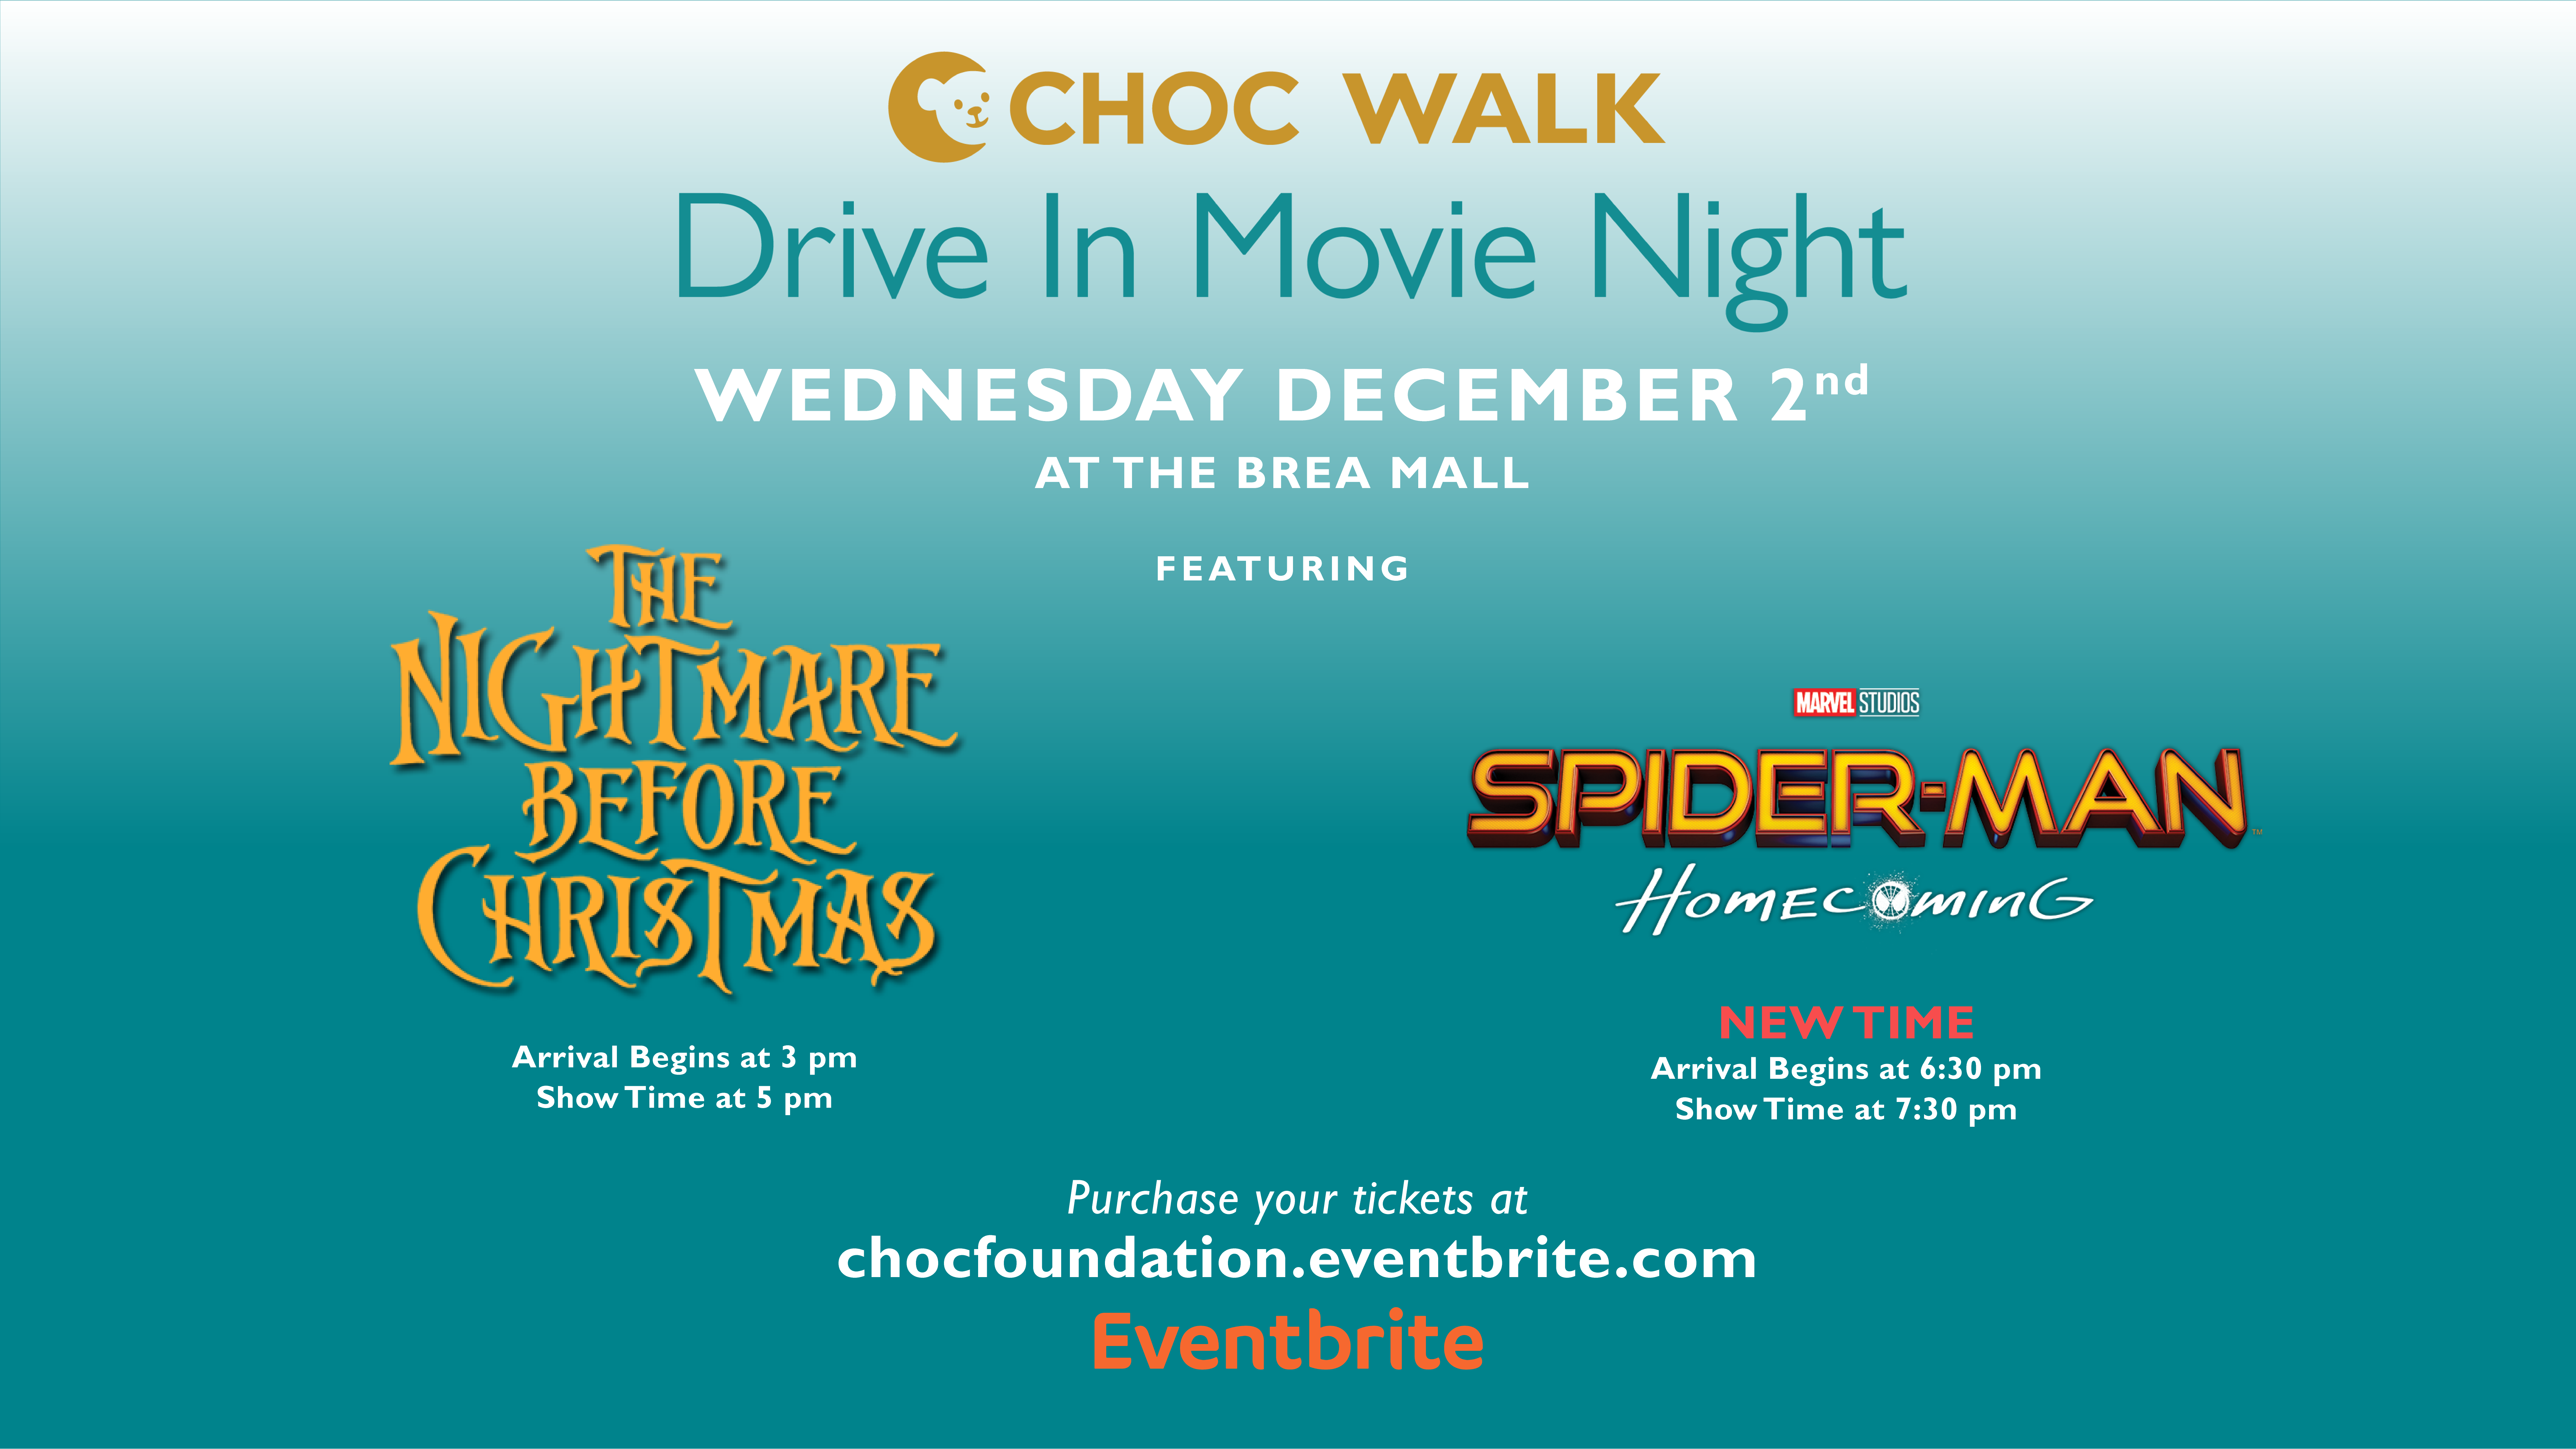 5 Reasons to Attend CHOC’s Drive-In Movie Night this Wednesday